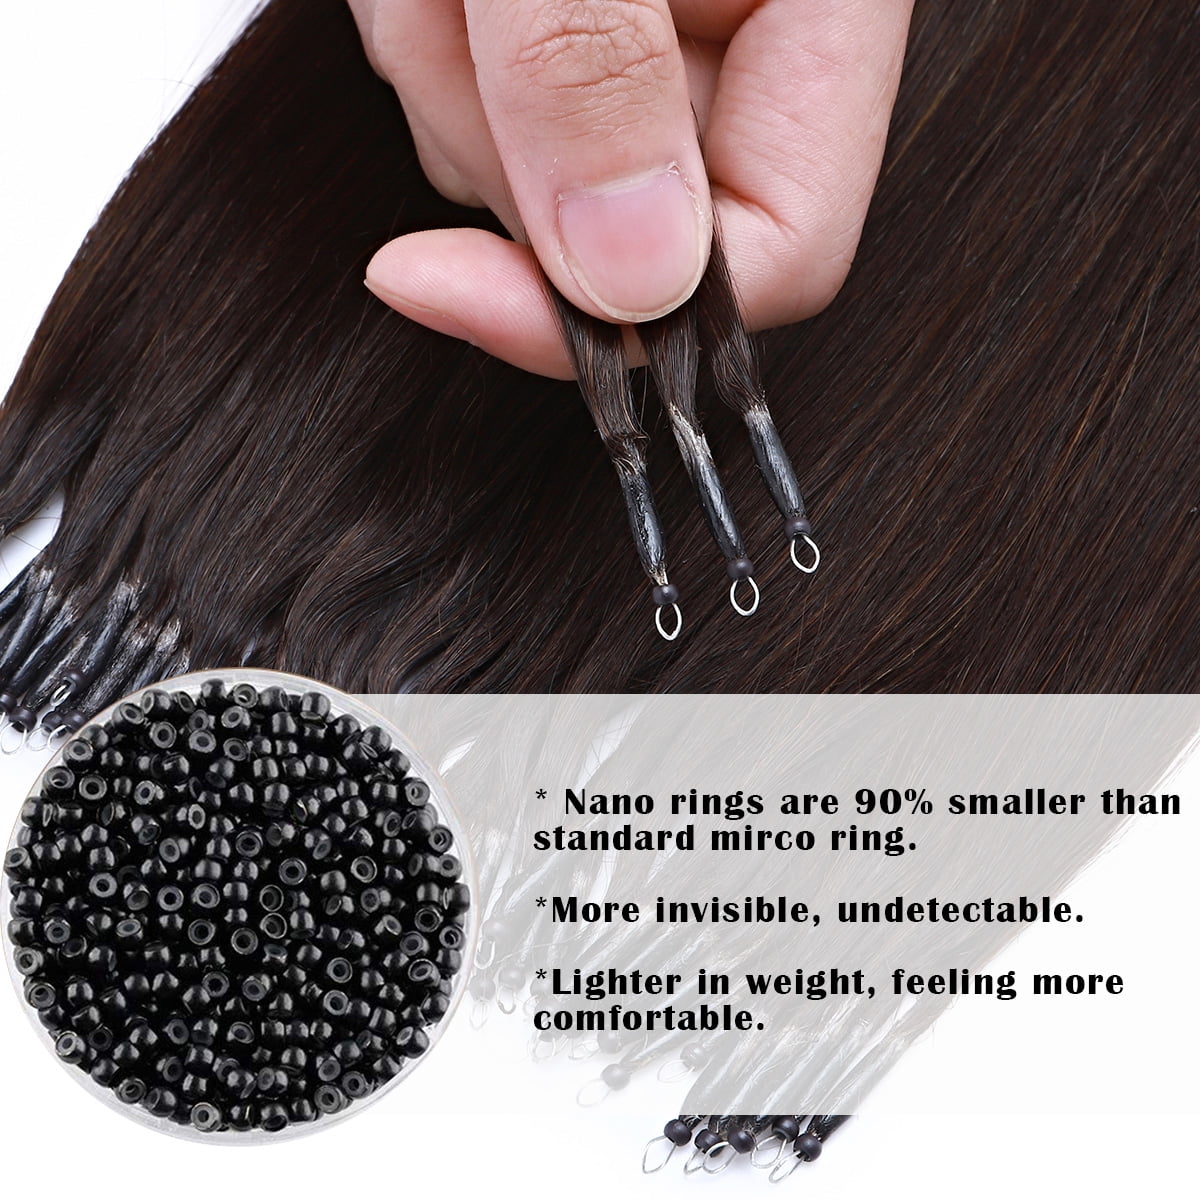 Bag 5.0mmx3.0mmx3.0mm Micro Aluminium With Silicone Rings Links/Beads For  Hair Extensions Measuring Tools From Harmonywigs, $14.27